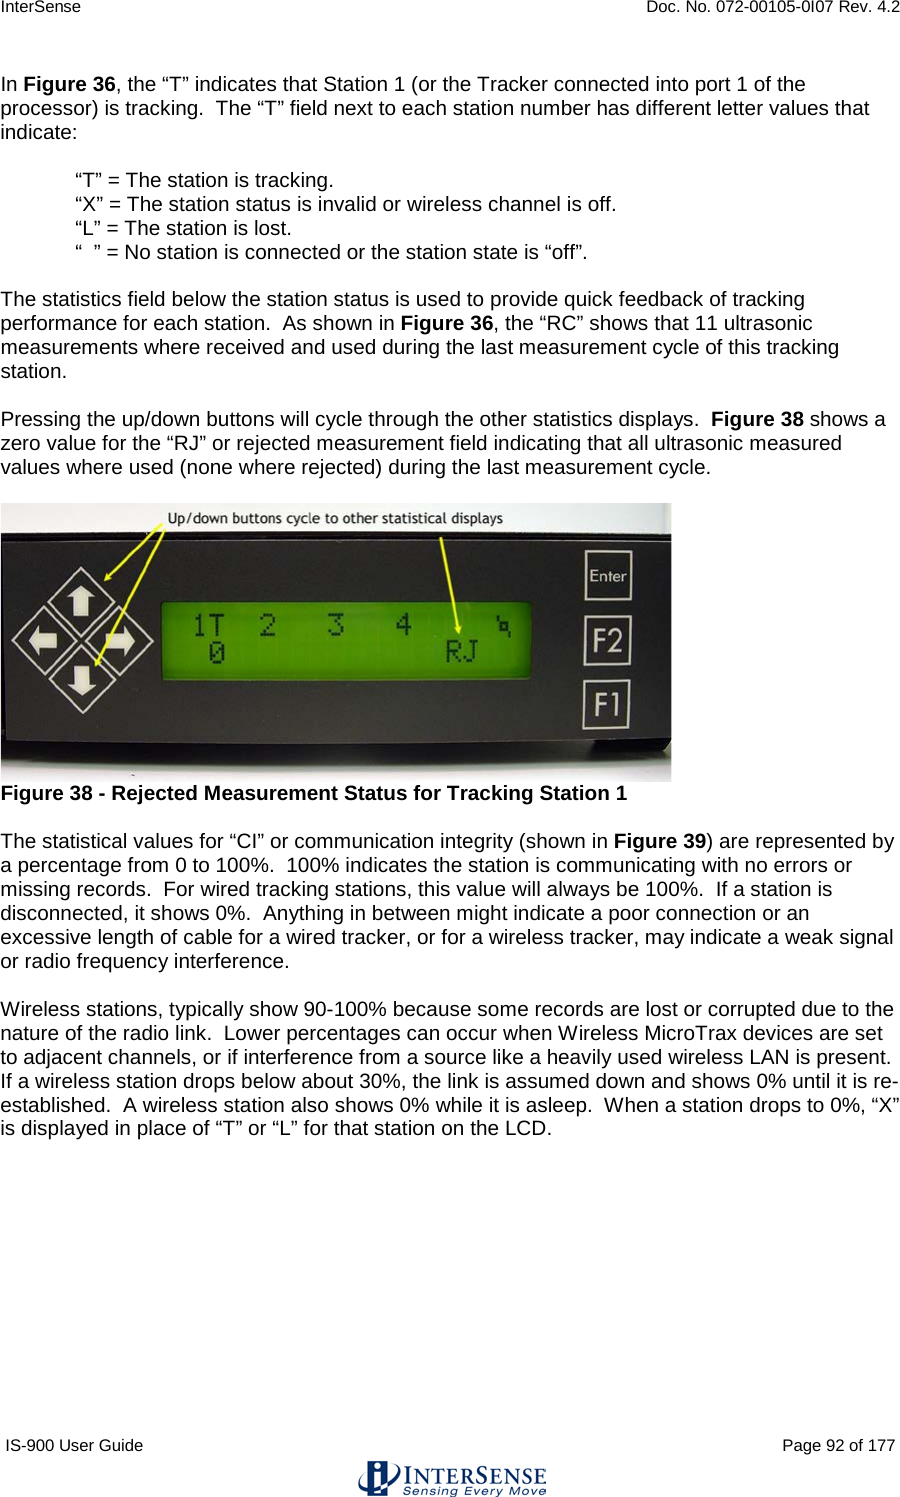 InterSense    Doc. No. 072-00105-0I07 Rev. 4.2 IS-900 User Guide                                                                                                                                          Page 92 of 177  In Figure 36, the “T” indicates that Station 1 (or the Tracker connected into port 1 of the processor) is tracking.  The “T” field next to each station number has different letter values that indicate:  “T” = The station is tracking. “X” = The station status is invalid or wireless channel is off. “L” = The station is lost. “  ” = No station is connected or the station state is “off”.  The statistics field below the station status is used to provide quick feedback of tracking performance for each station.  As shown in Figure 36, the “RC” shows that 11 ultrasonic measurements where received and used during the last measurement cycle of this tracking station.  Pressing the up/down buttons will cycle through the other statistics displays.  Figure 38 shows a zero value for the “RJ” or rejected measurement field indicating that all ultrasonic measured values where used (none where rejected) during the last measurement cycle.    Figure 38 - Rejected Measurement Status for Tracking Station 1  The statistical values for “CI” or communication integrity (shown in Figure 39) are represented by a percentage from 0 to 100%.  100% indicates the station is communicating with no errors or missing records.  For wired tracking stations, this value will always be 100%.  If a station is disconnected, it shows 0%.  Anything in between might indicate a poor connection or an excessive length of cable for a wired tracker, or for a wireless tracker, may indicate a weak signal or radio frequency interference.    Wireless stations, typically show 90-100% because some records are lost or corrupted due to the nature of the radio link.  Lower percentages can occur when Wireless MicroTrax devices are set to adjacent channels, or if interference from a source like a heavily used wireless LAN is present.  If a wireless station drops below about 30%, the link is assumed down and shows 0% until it is re-established.  A wireless station also shows 0% while it is asleep.  When a station drops to 0%, “X” is displayed in place of “T” or “L” for that station on the LCD.  